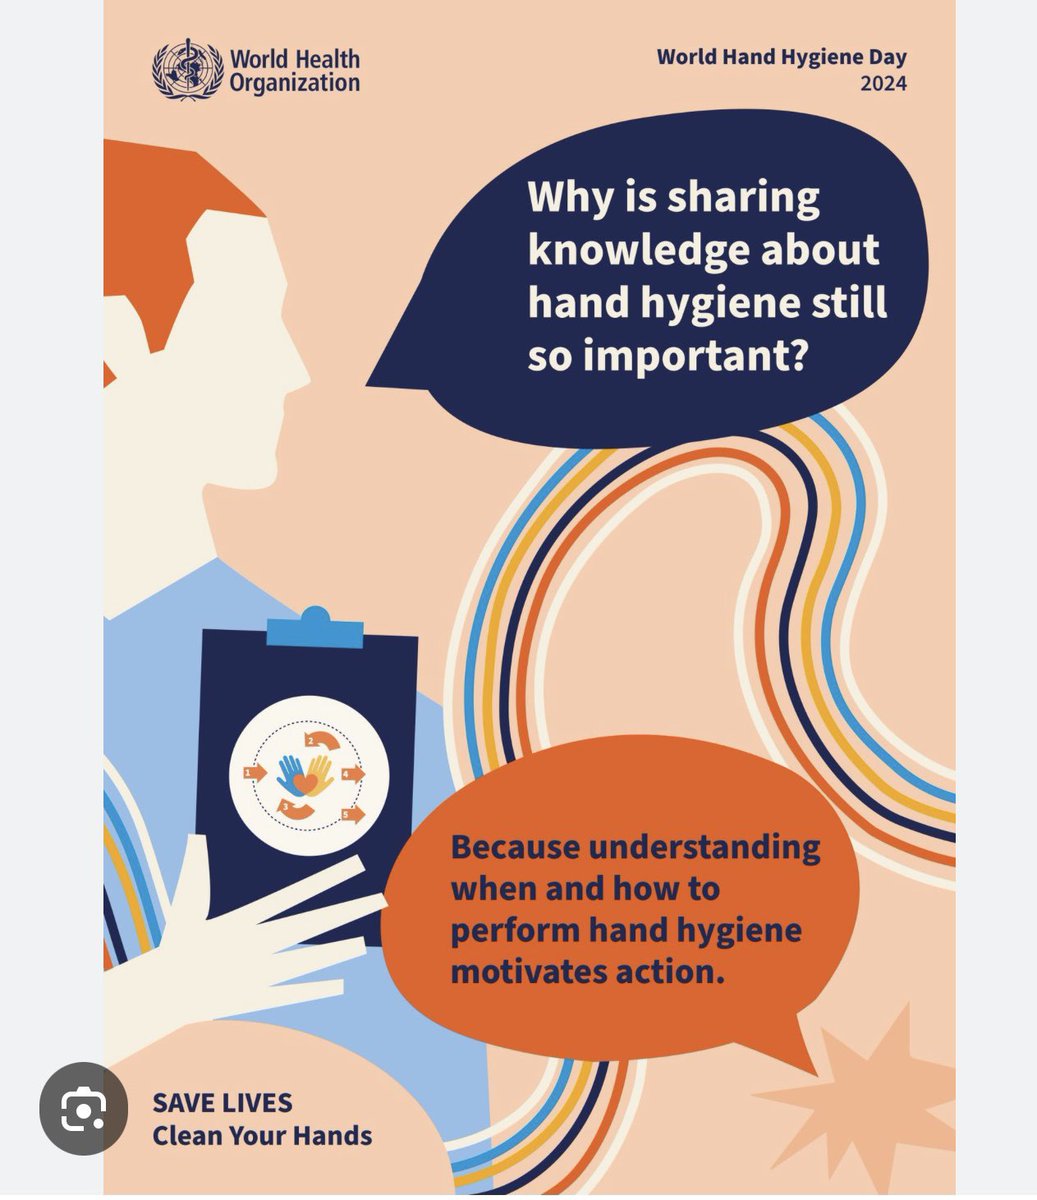 Well done to you all! We couldn’t agree more. Contextualising #InfectionPrevention #SSIPrevention Thank you @WHO annual #HandHygiene campaign Team. #PatientSafety #KnowledgeIsPower #MotivatingAction #InThisTogether 🙌🏼🙌🏼